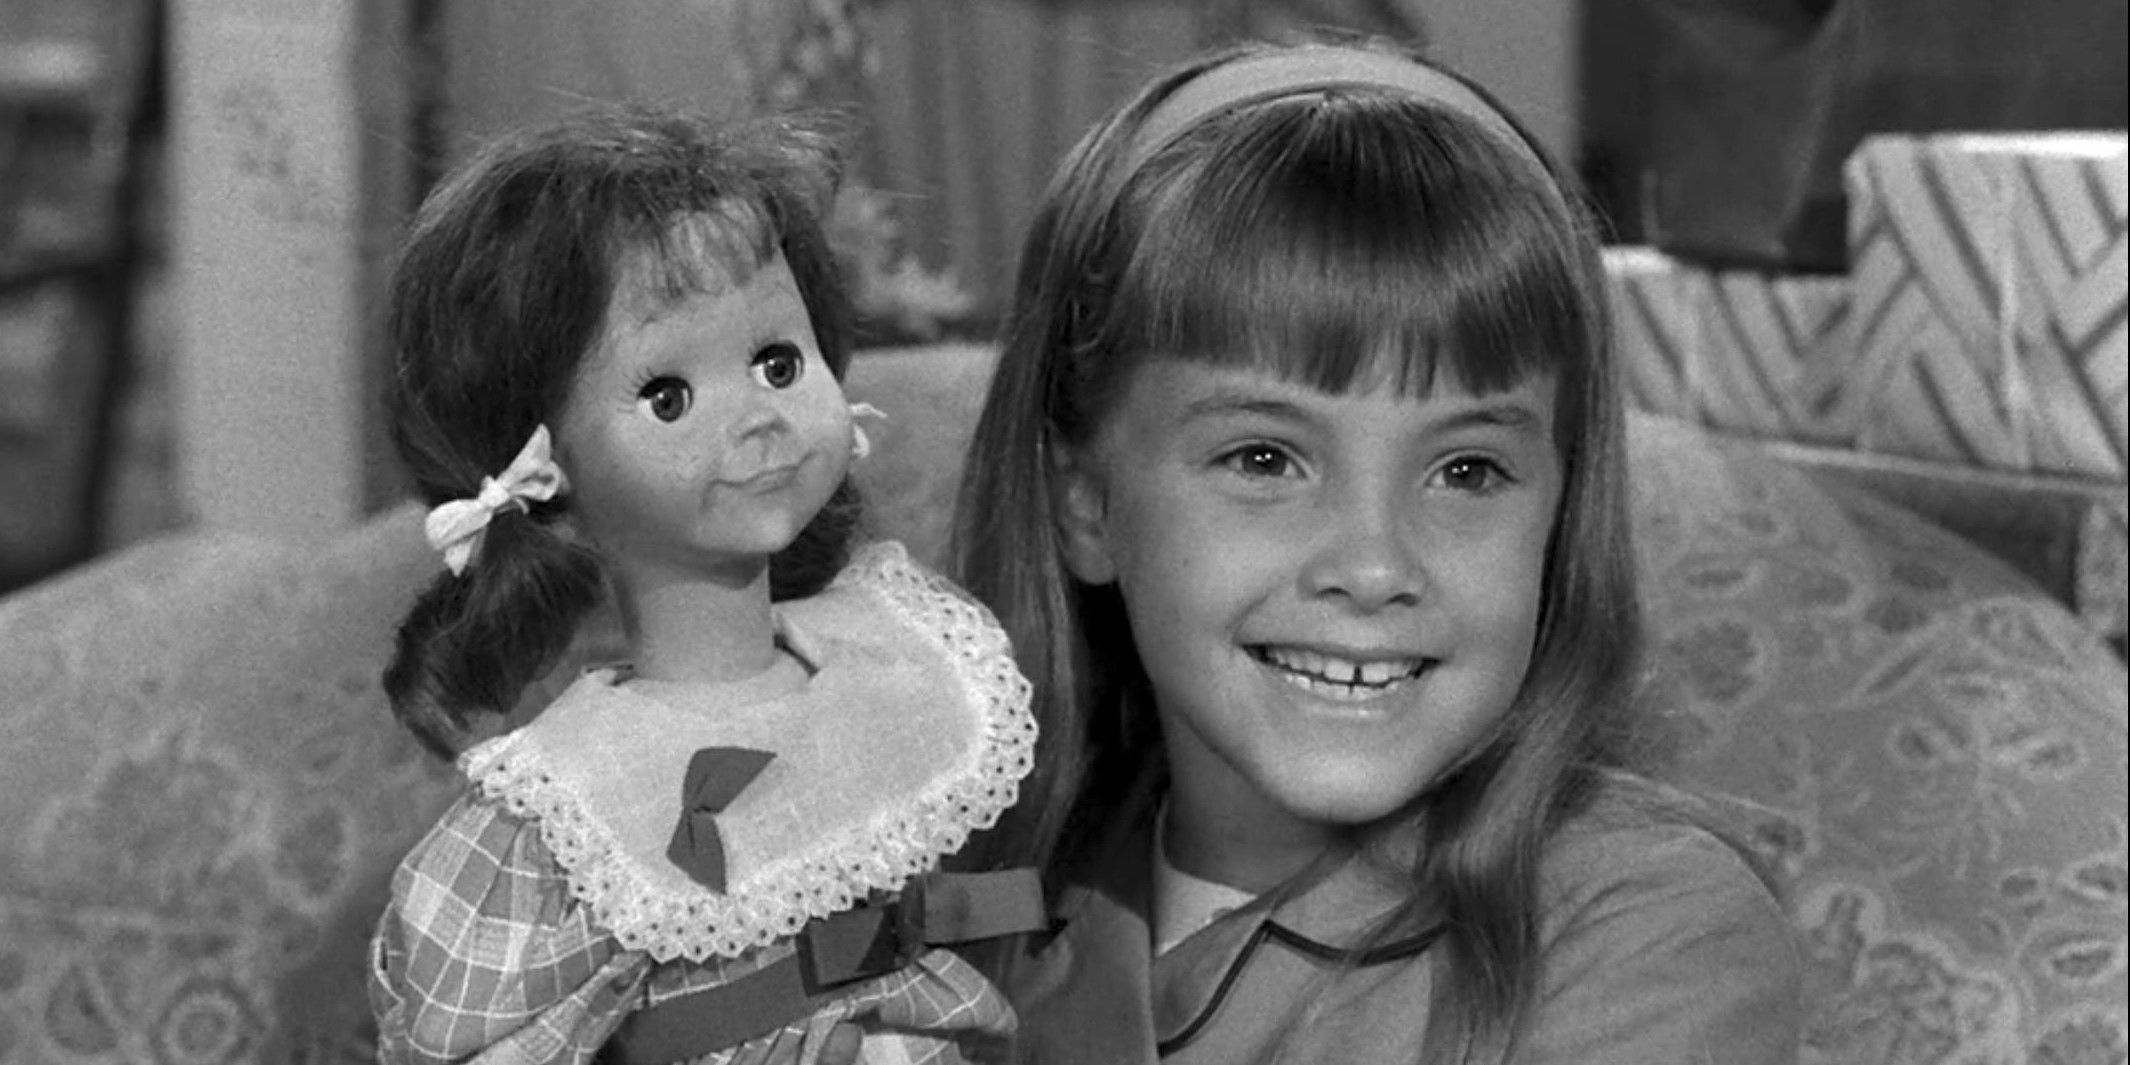 Tracy Stratford holding Talking Tina voiced by June Foray in Living Doll from The Twilight Zone